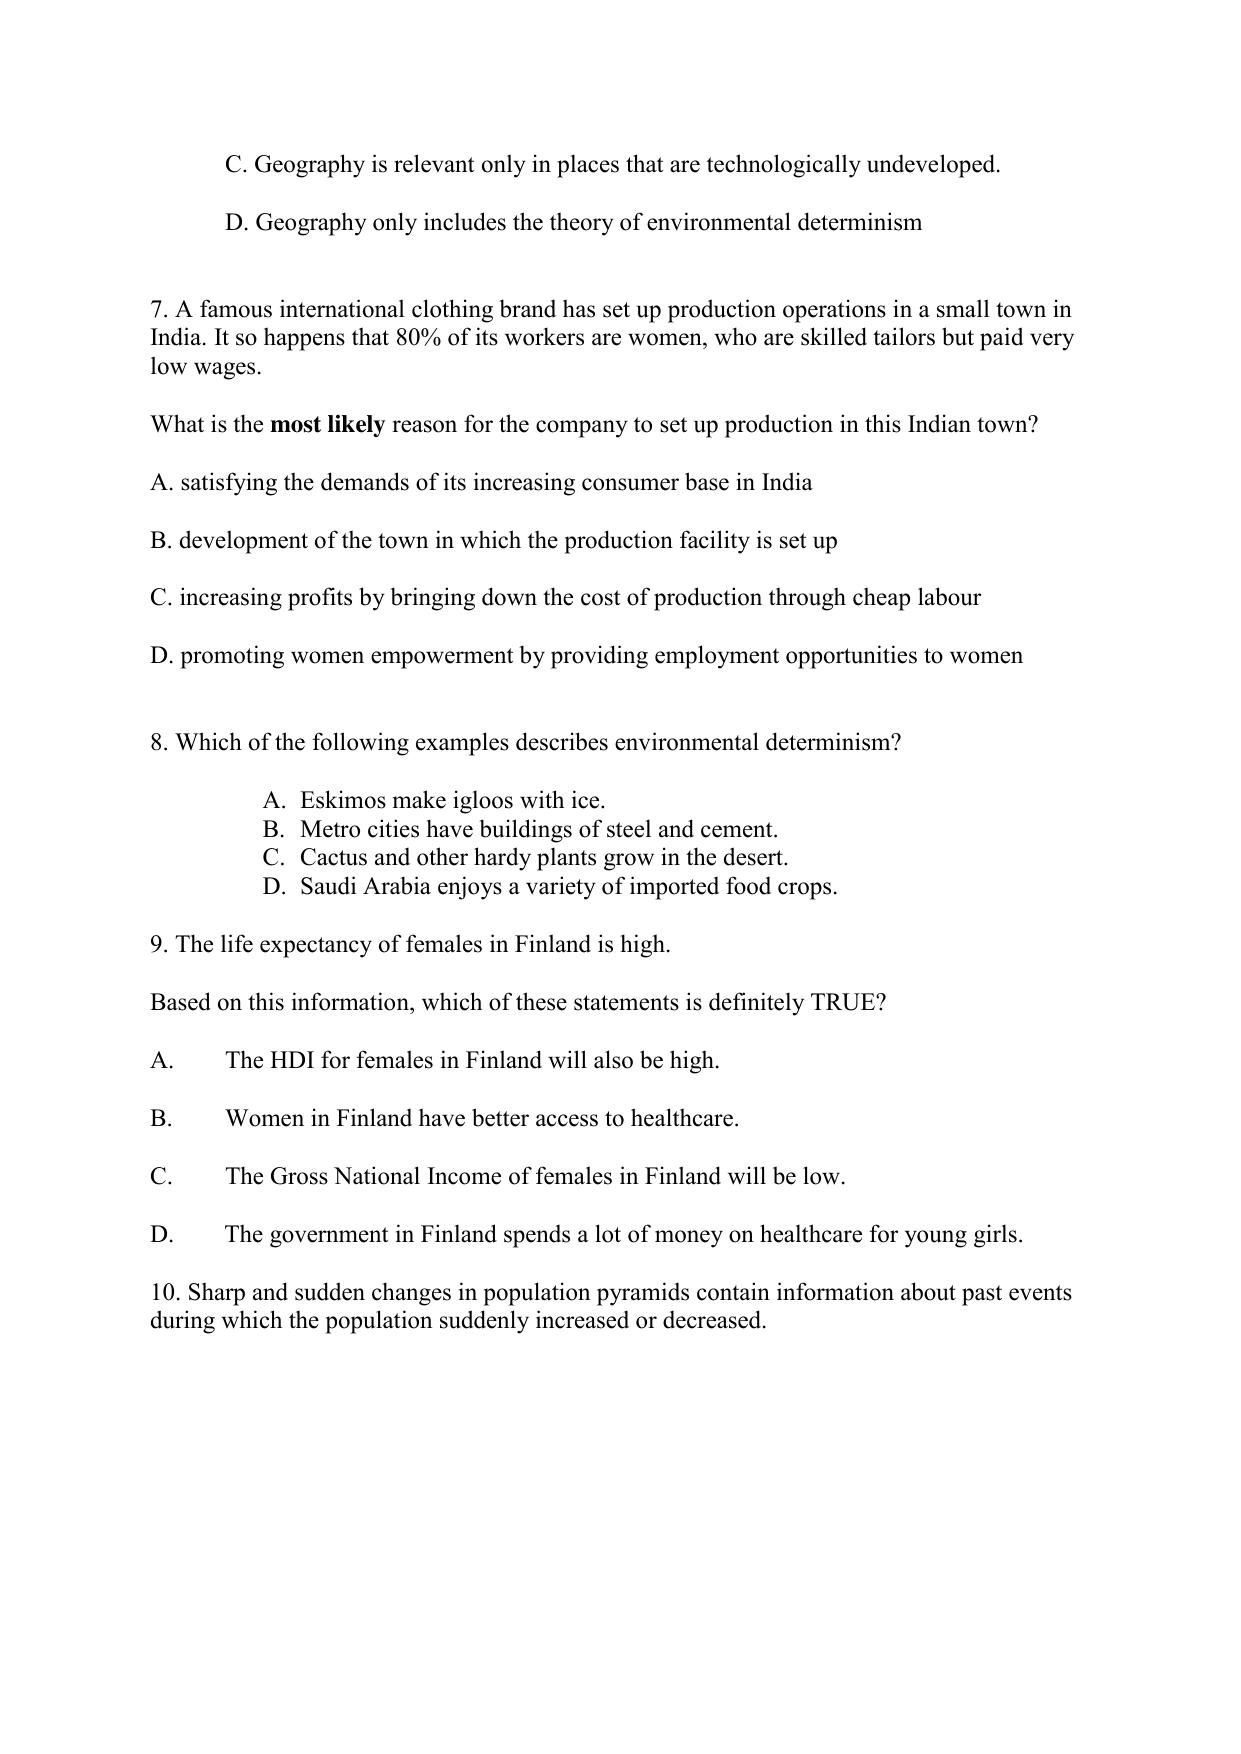 CBSE Class 12 Geography Term 1 Practice Questions 2021-22 - Page 2